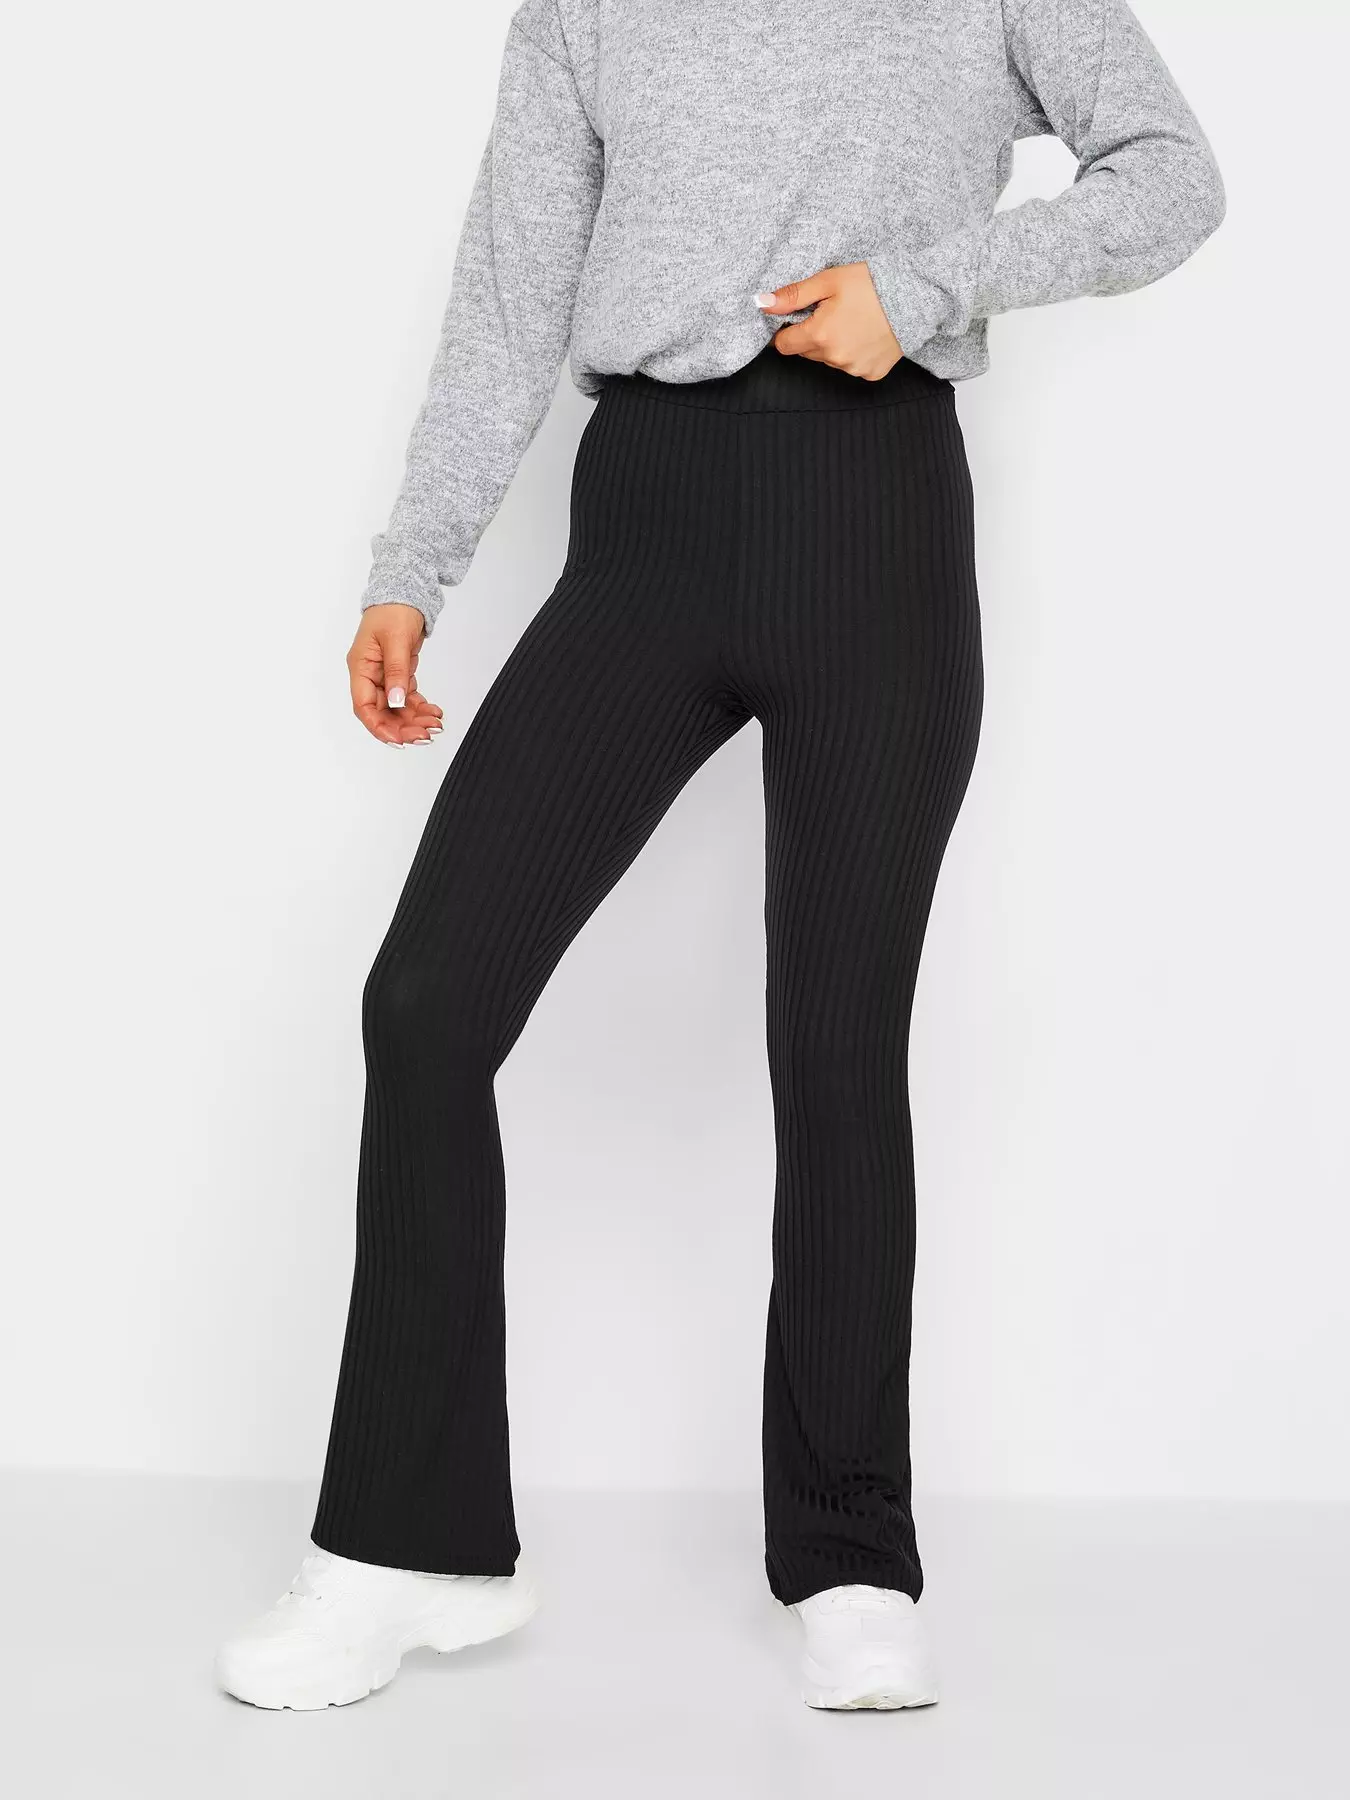 Petite Grey Knitted Fold Over Flared Pants